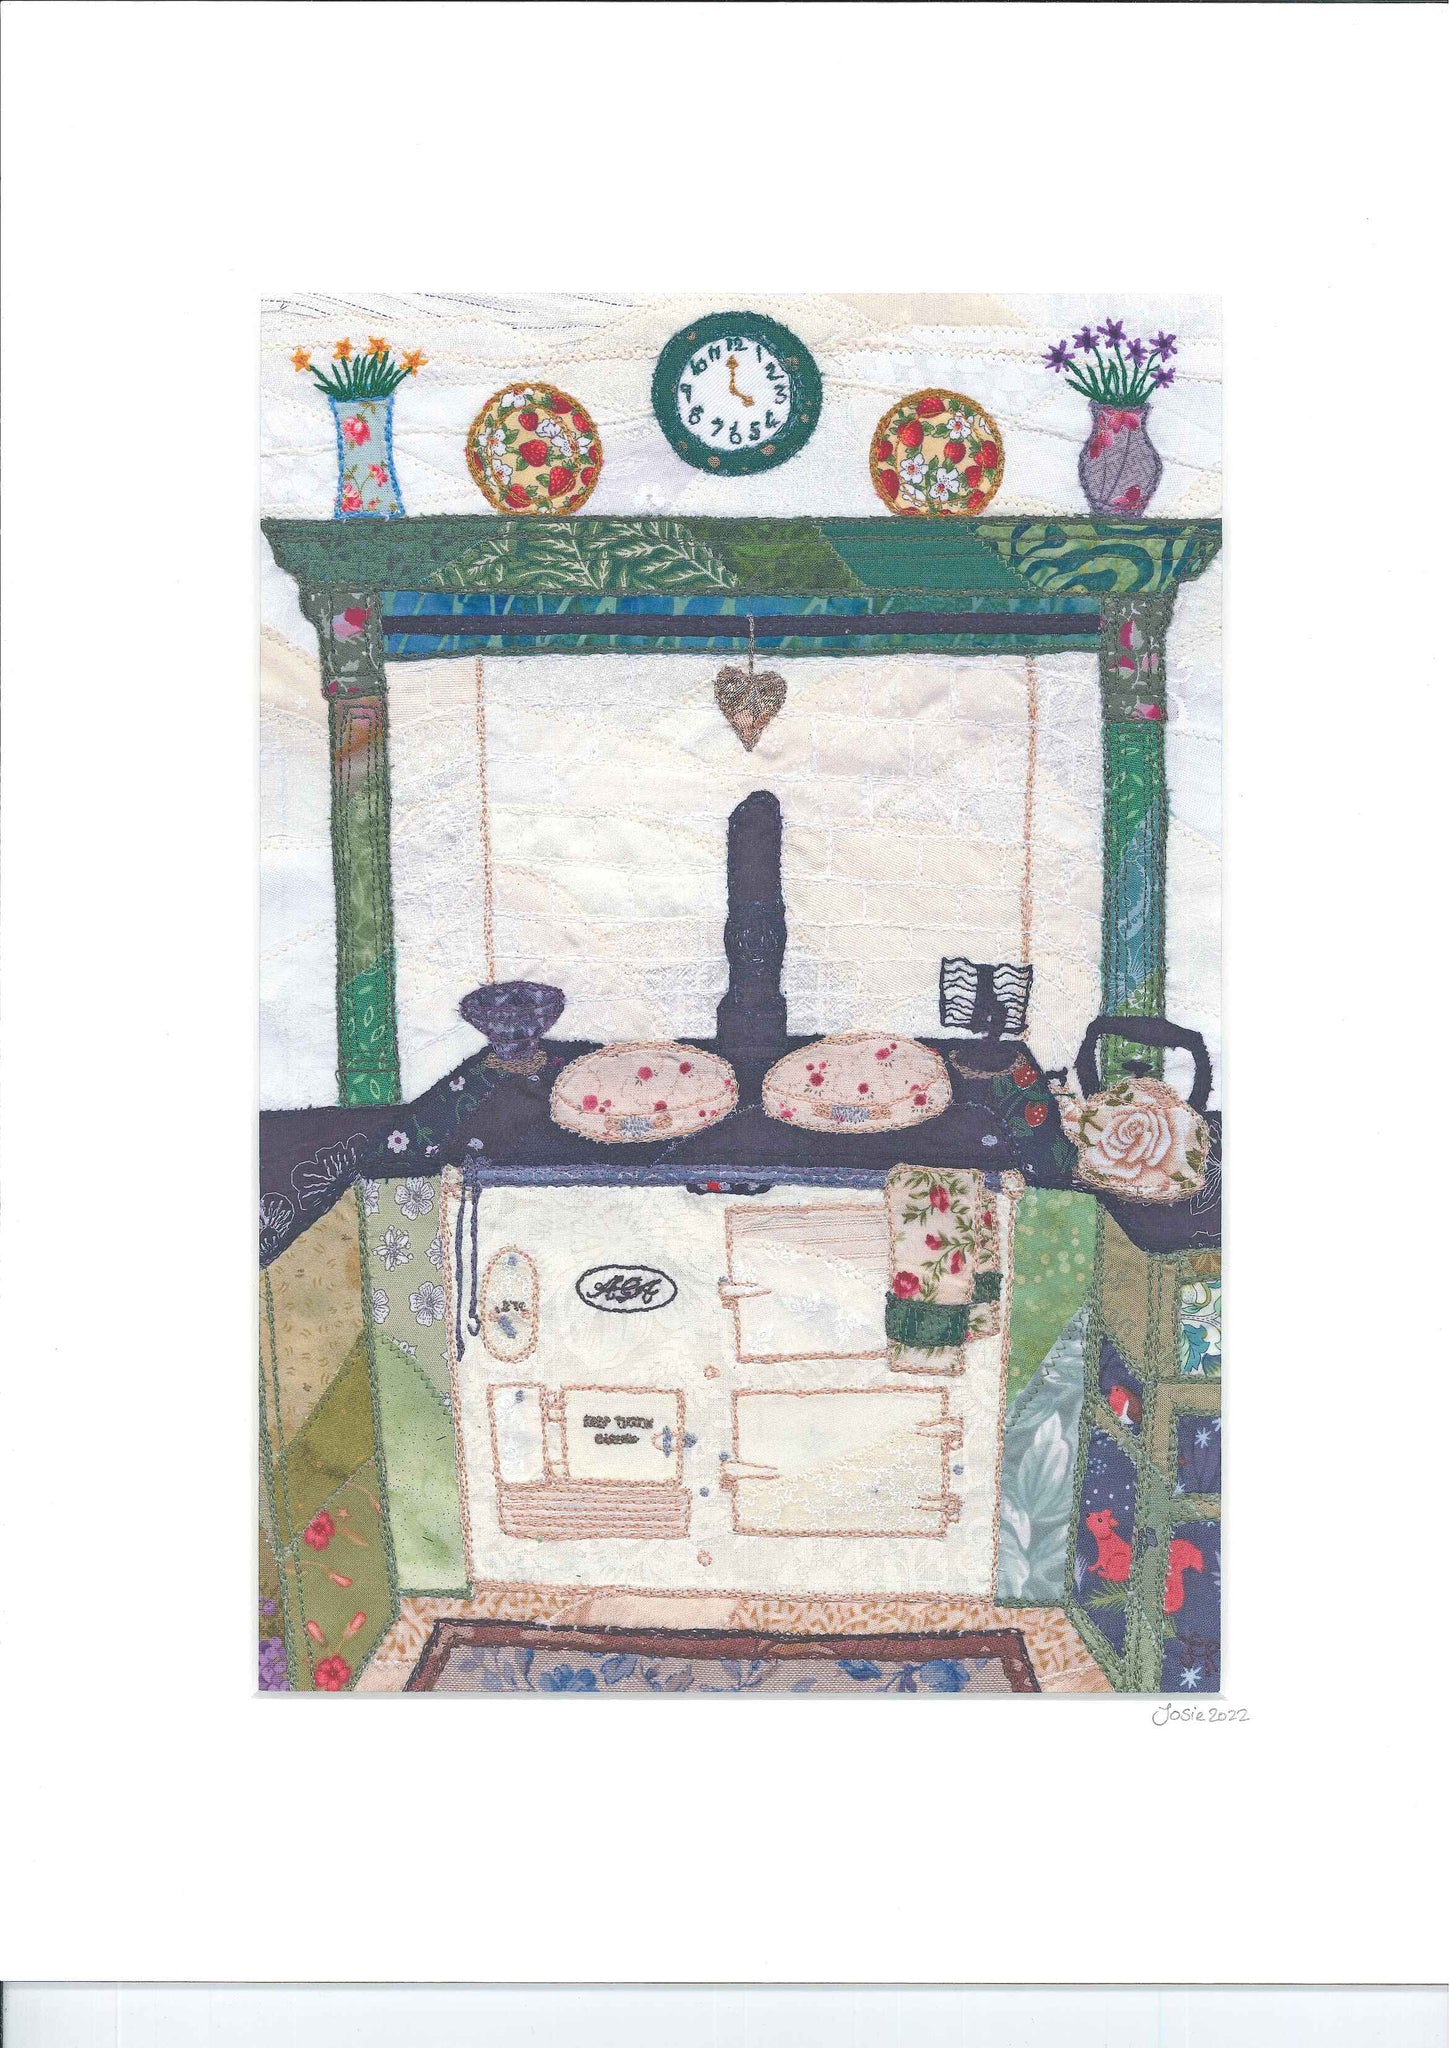 'Heart of the Home' A4 Limited Edition Print by Josie Russell